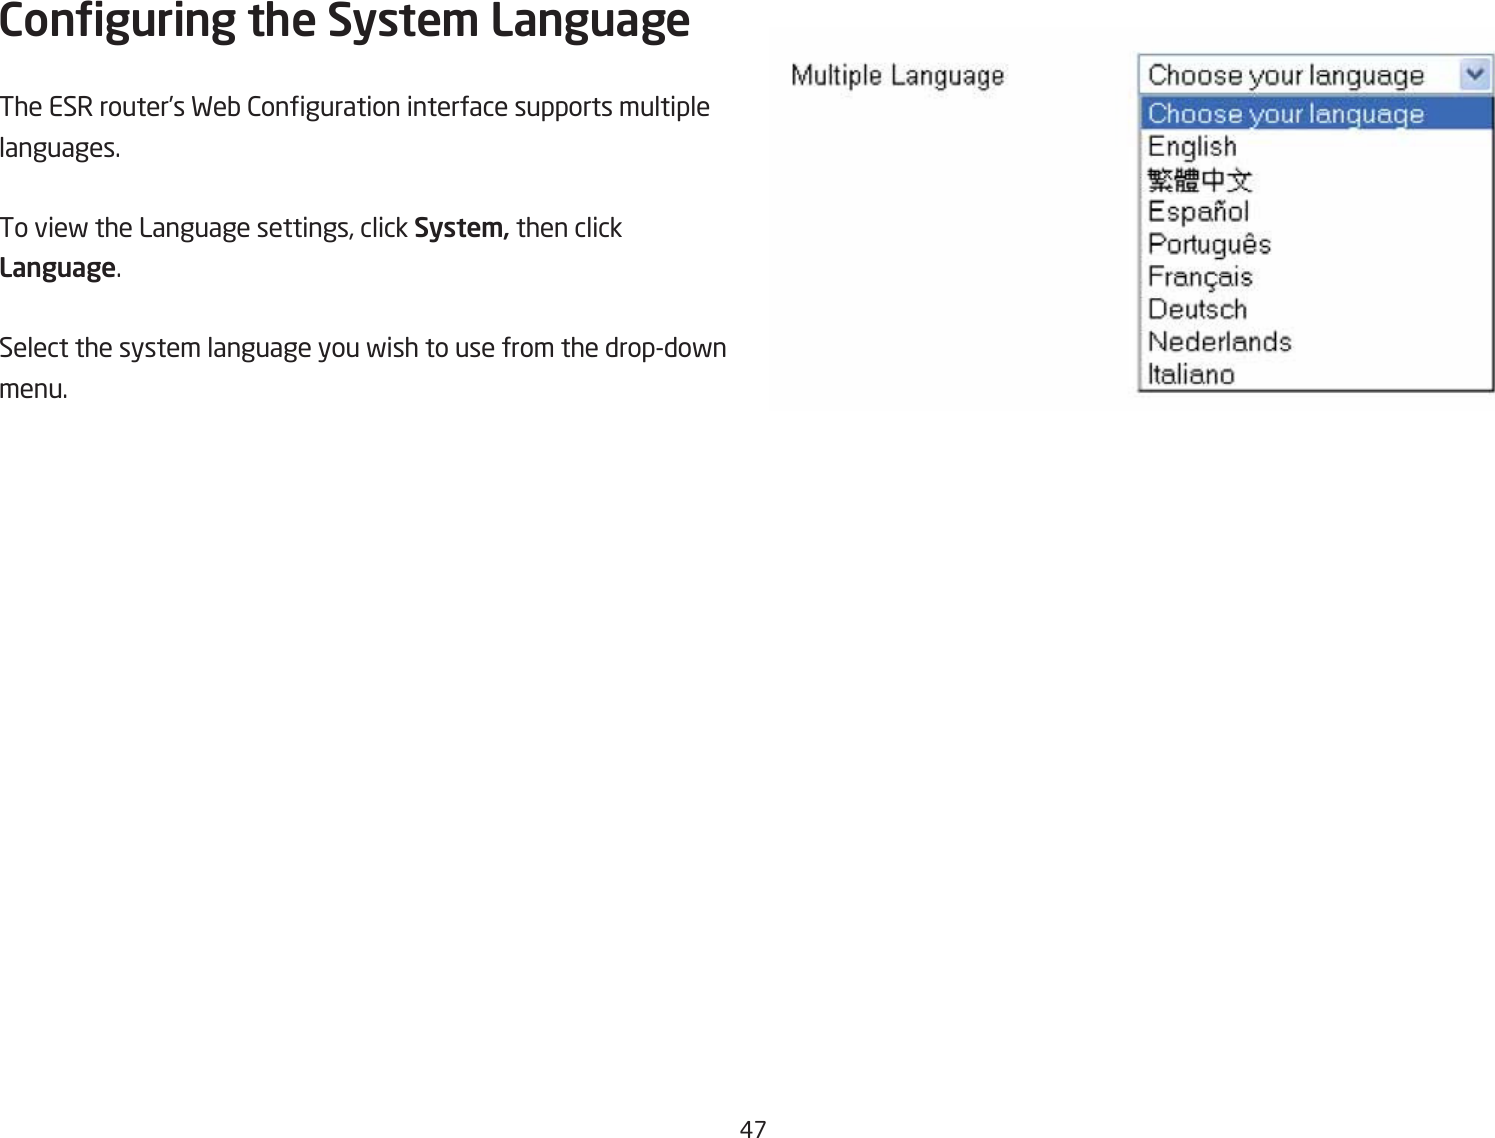 #&amp;Conguring the Syste\ LanguageThe ESR router’s FeQ 2onguration interface supports multiple languages.To vief the Language settings, click Syste\ then click Language.Select the system language you fish to use from the dropdofn menu.